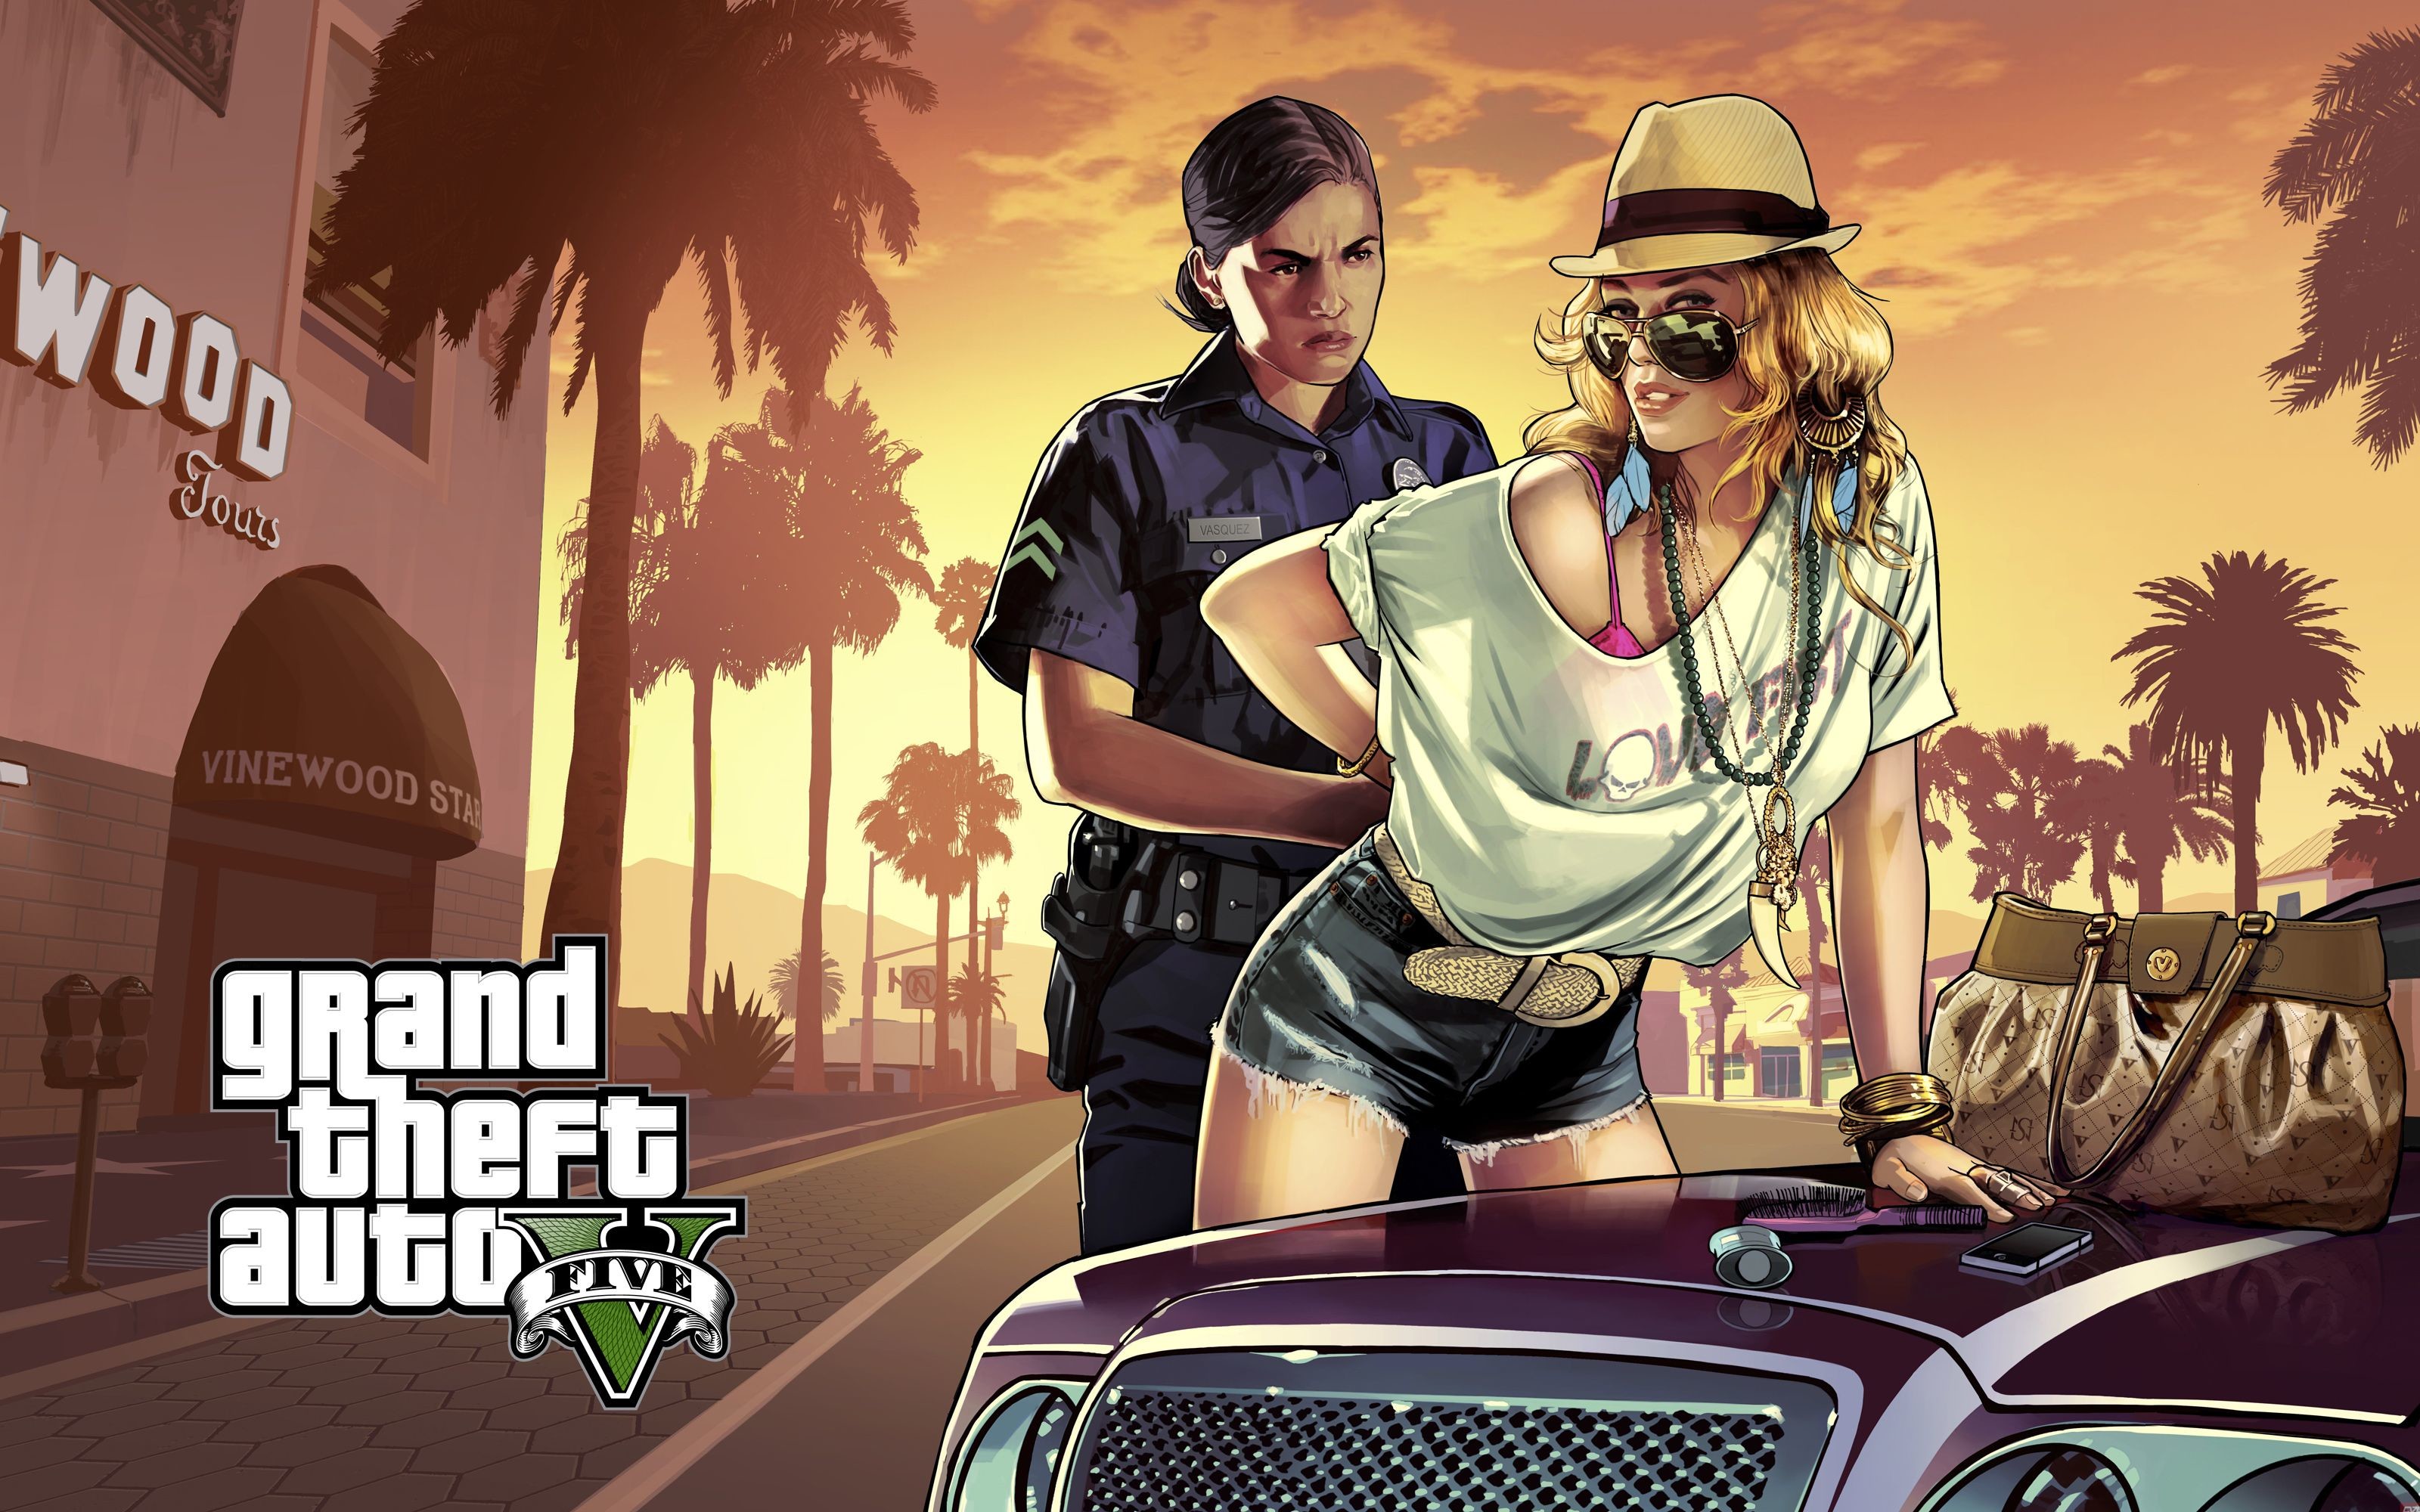 3200x2000 Image for Cool Grand Theft Auto HQ Wallpaper